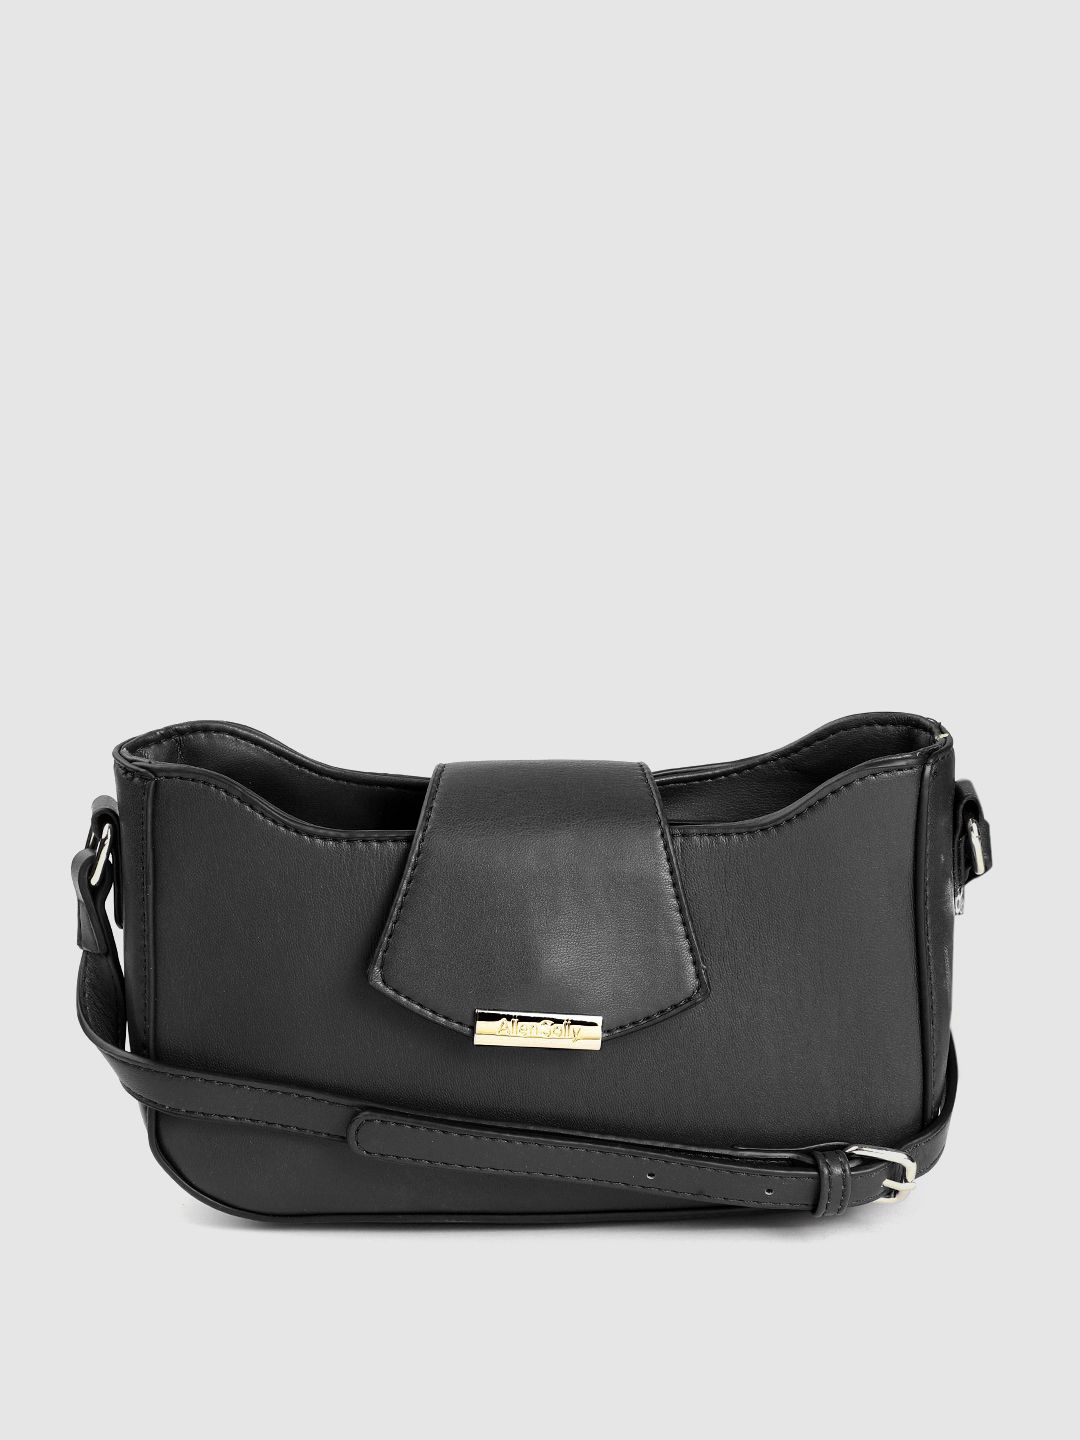 Allen Solly Black Solid Structured Sling Bag Price in India